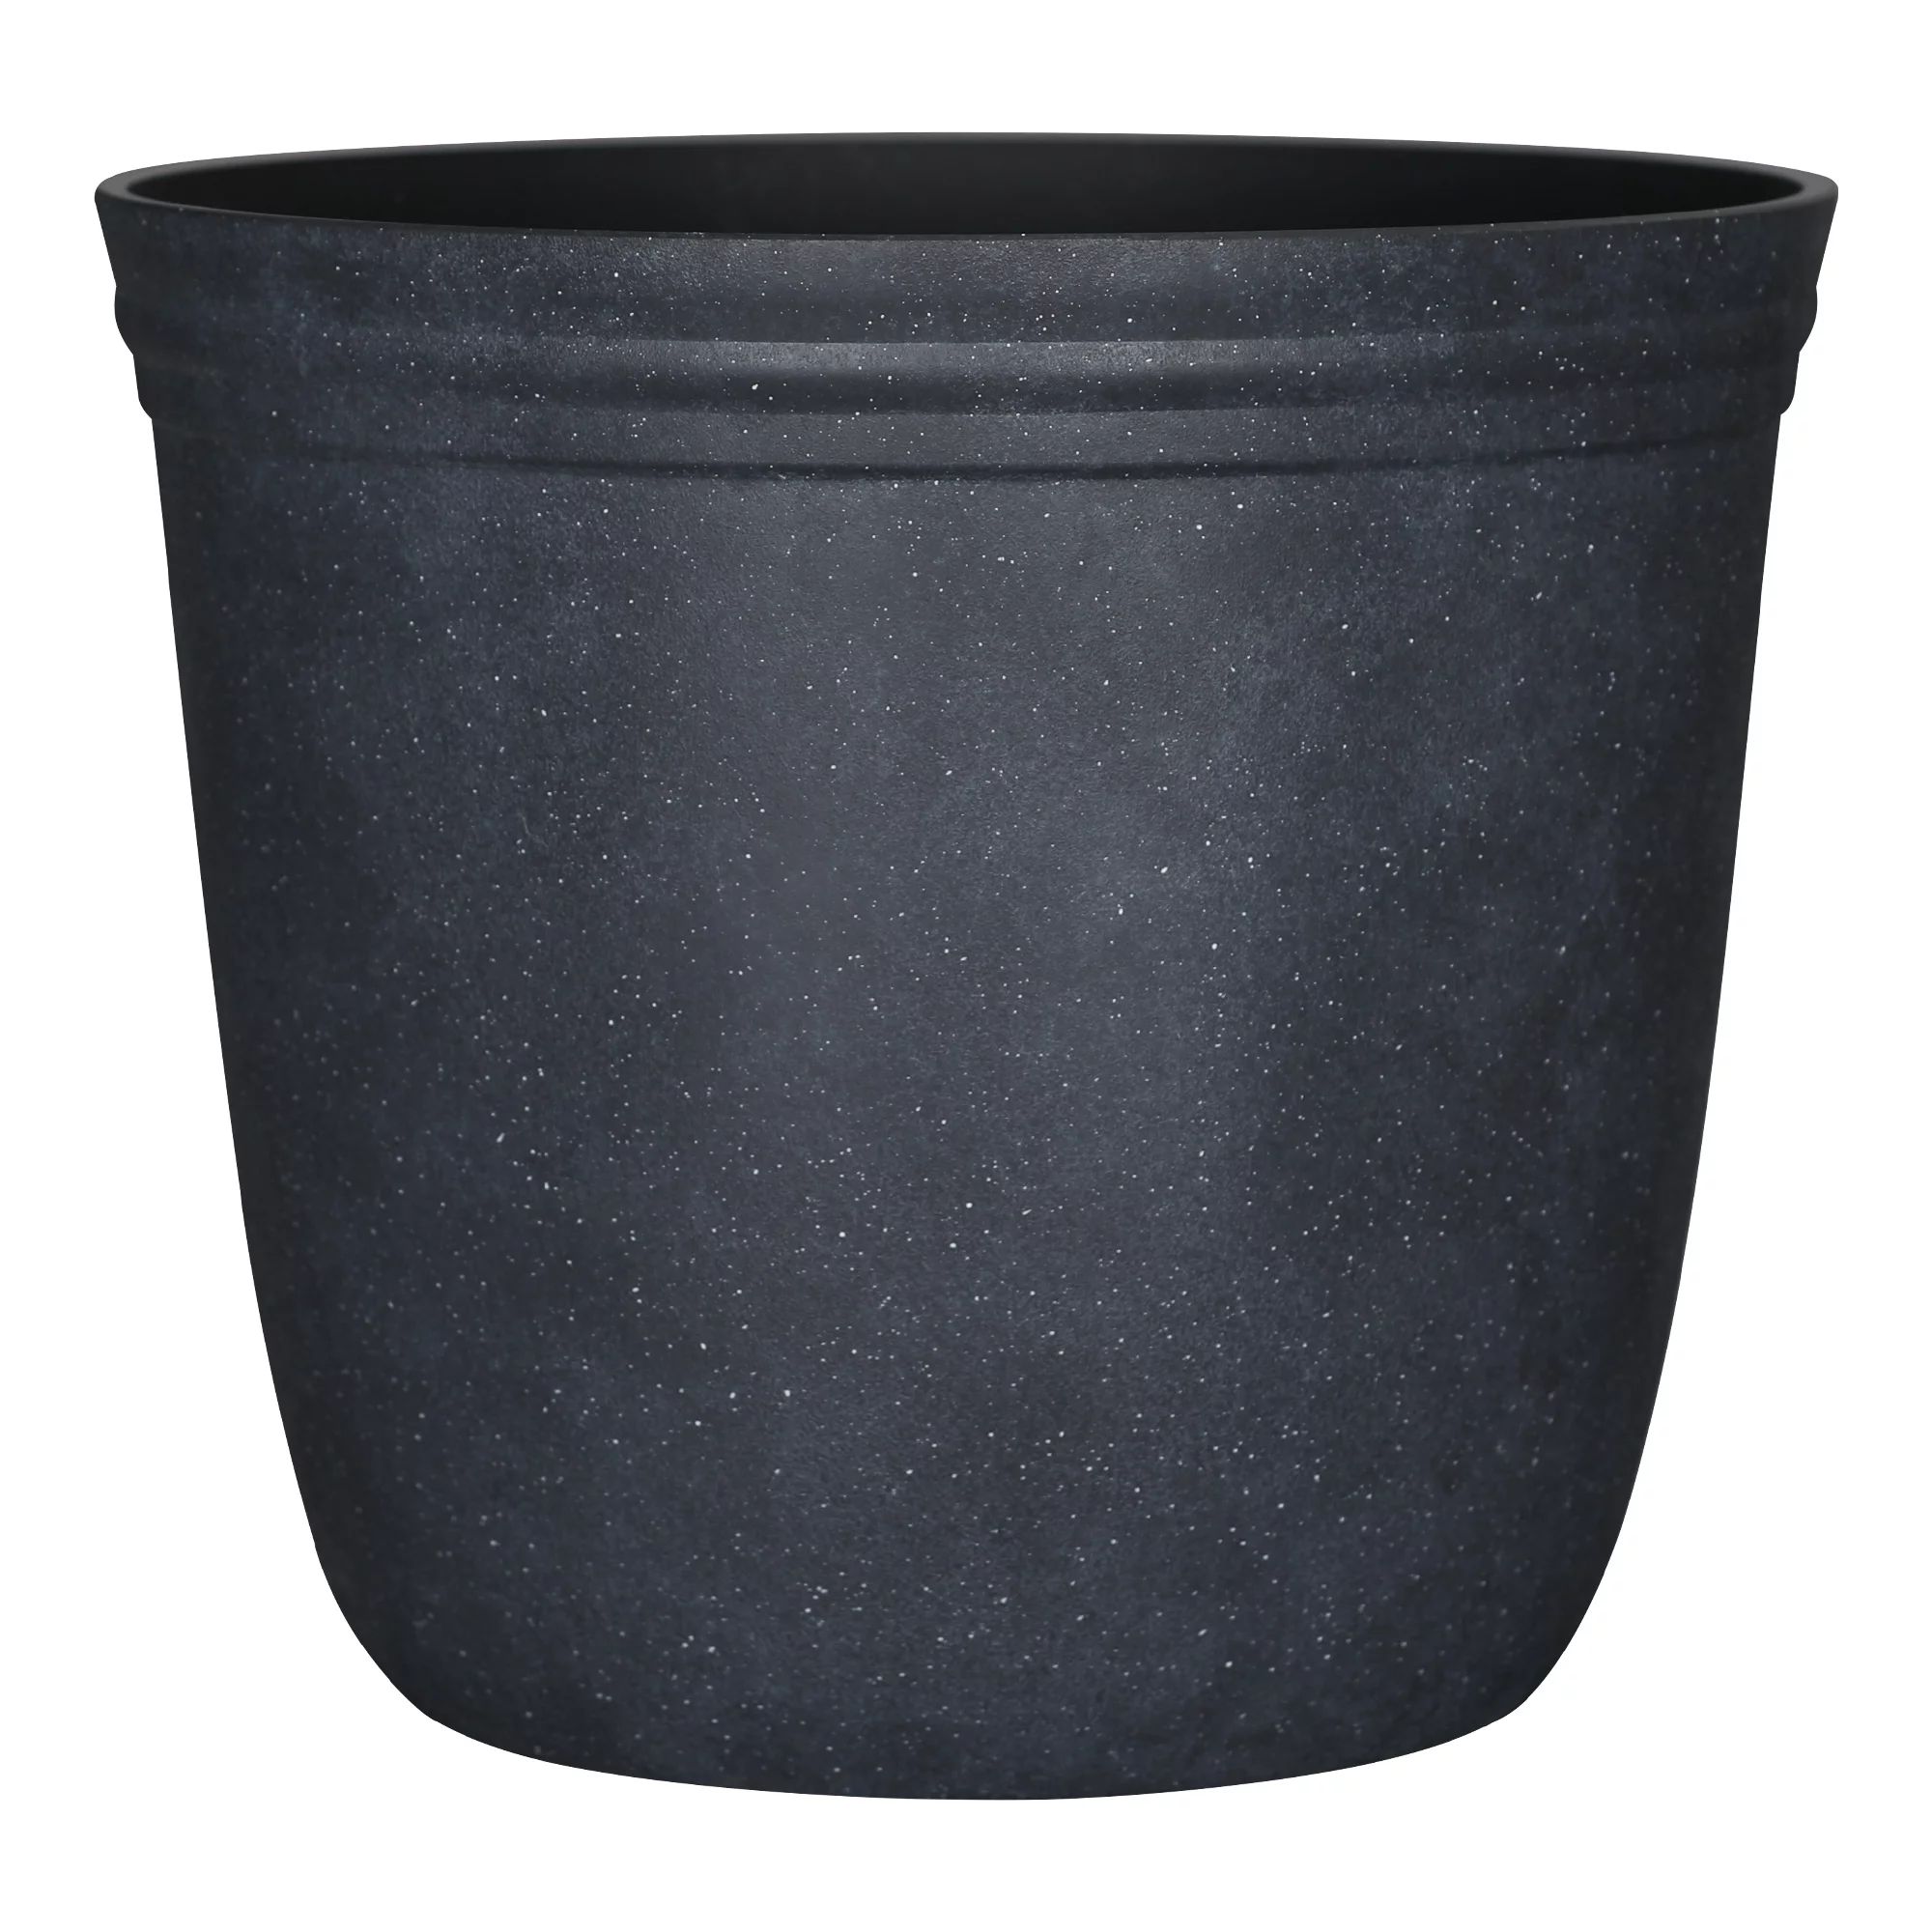 Better Homes & Gardens Baytree Black Resin Planter, 15.9in x 15.9in x 14in | Walmart (US)